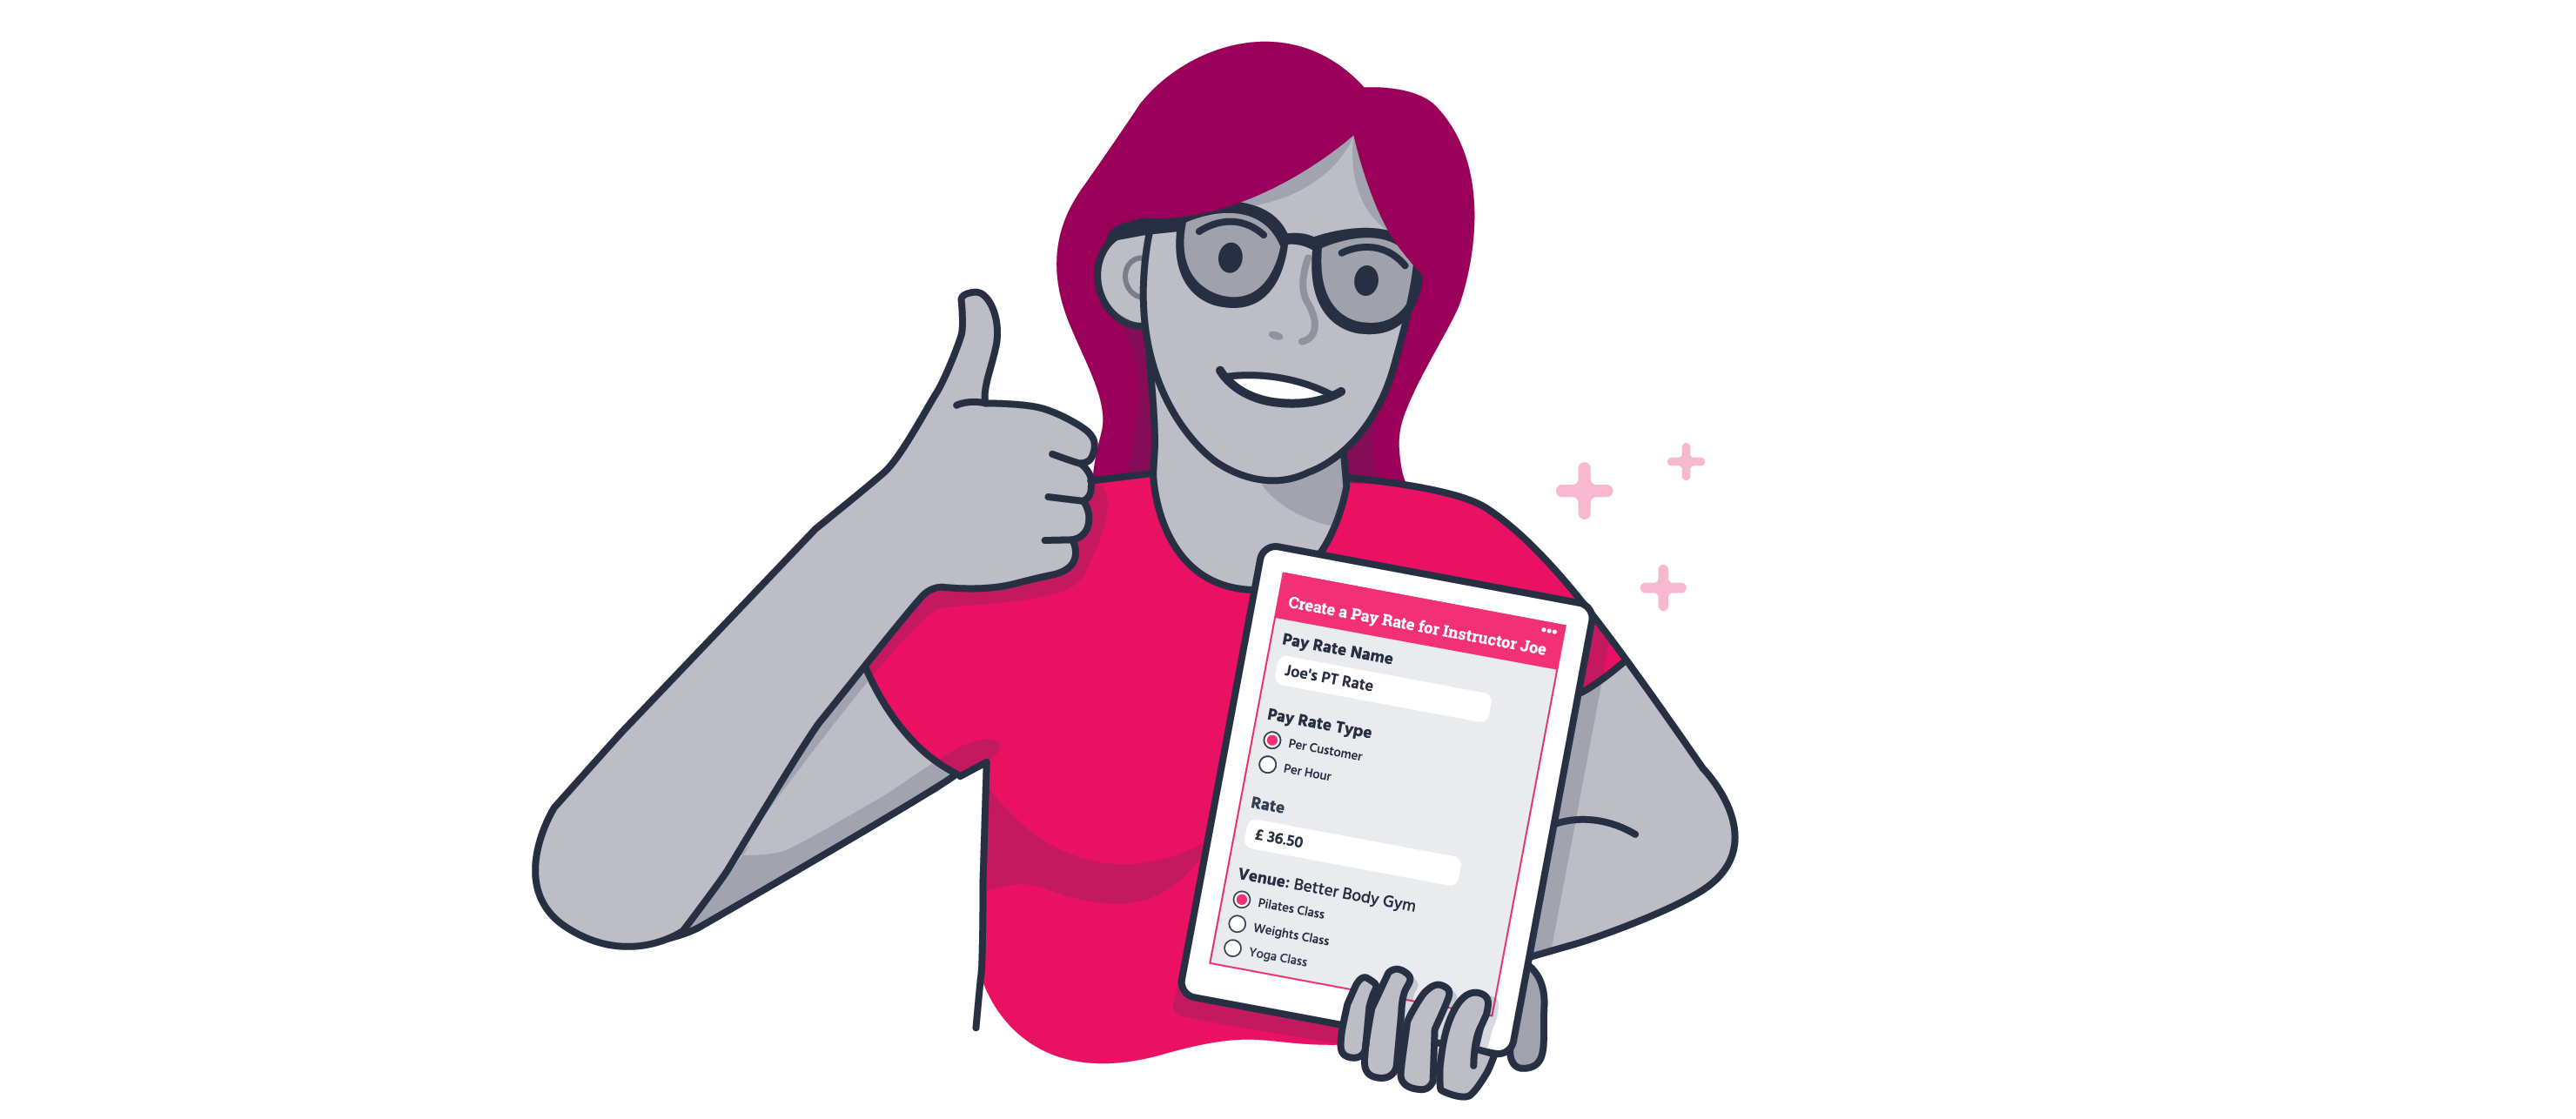 An illustration of a woman holding a table showing Pay Rates and doing a thumbs up.